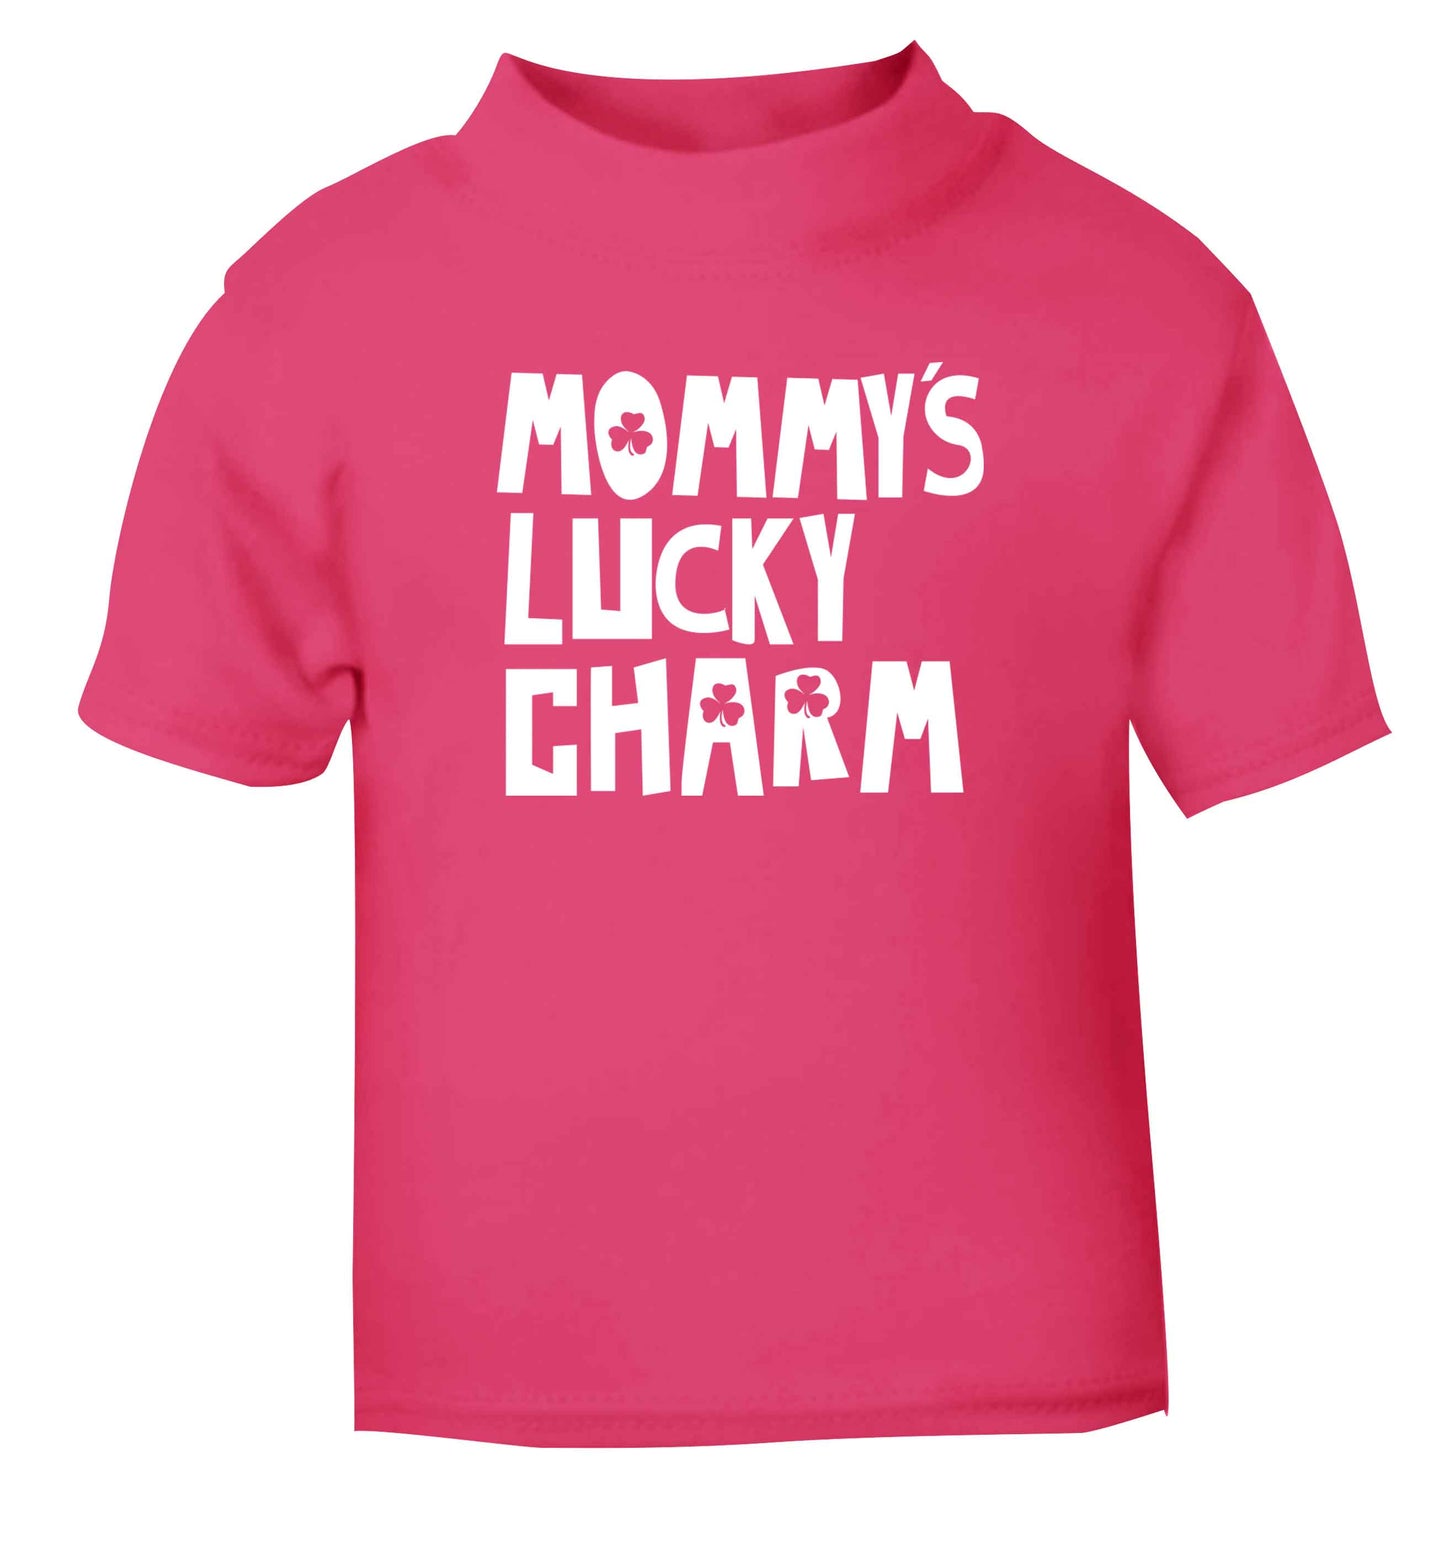 Mommy's lucky charm pink baby toddler Tshirt 2 Years